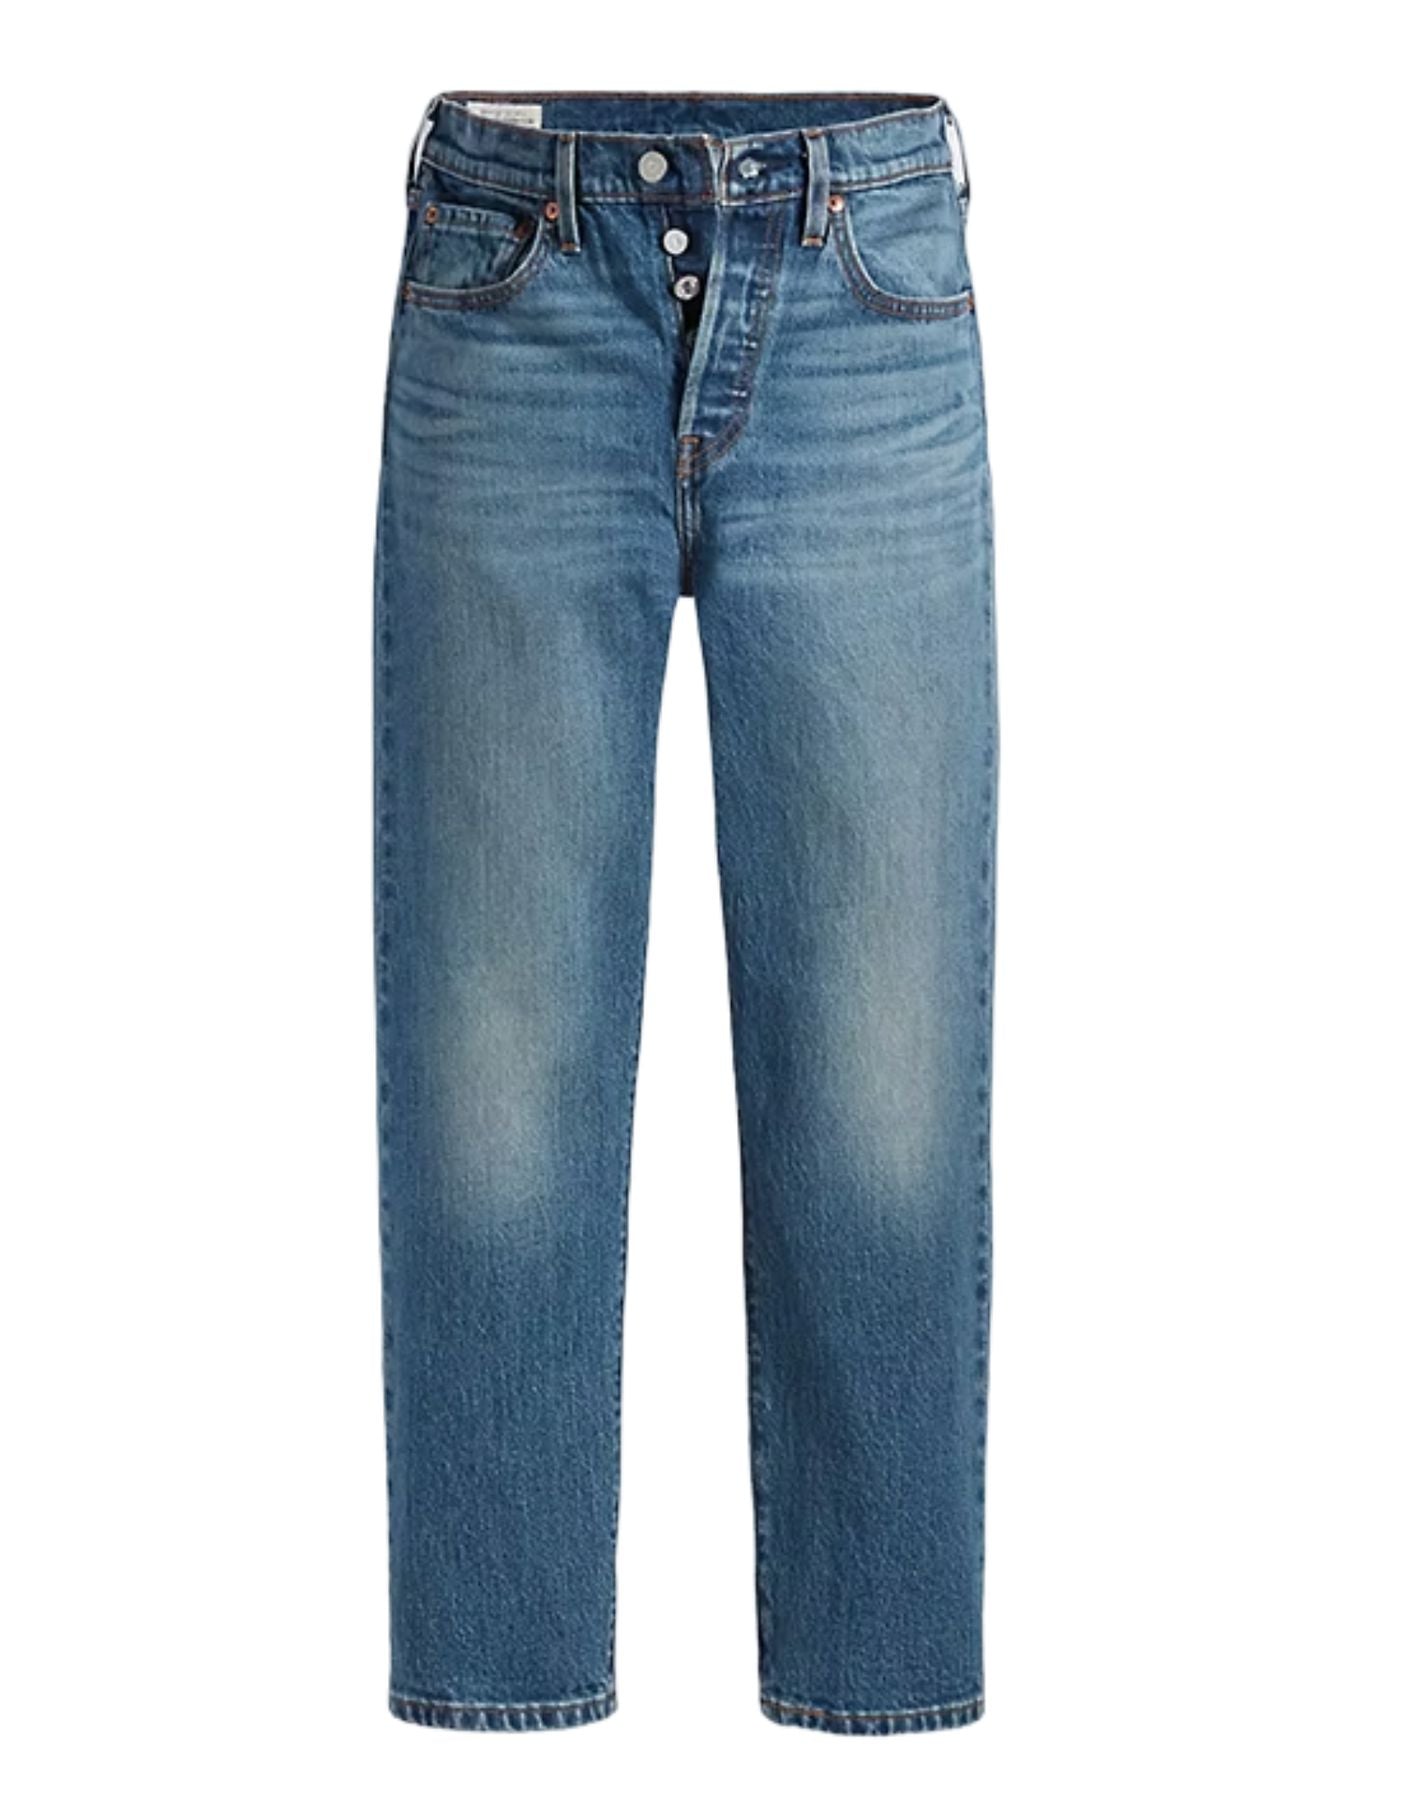 Jeans for woman 362000291 Levi's